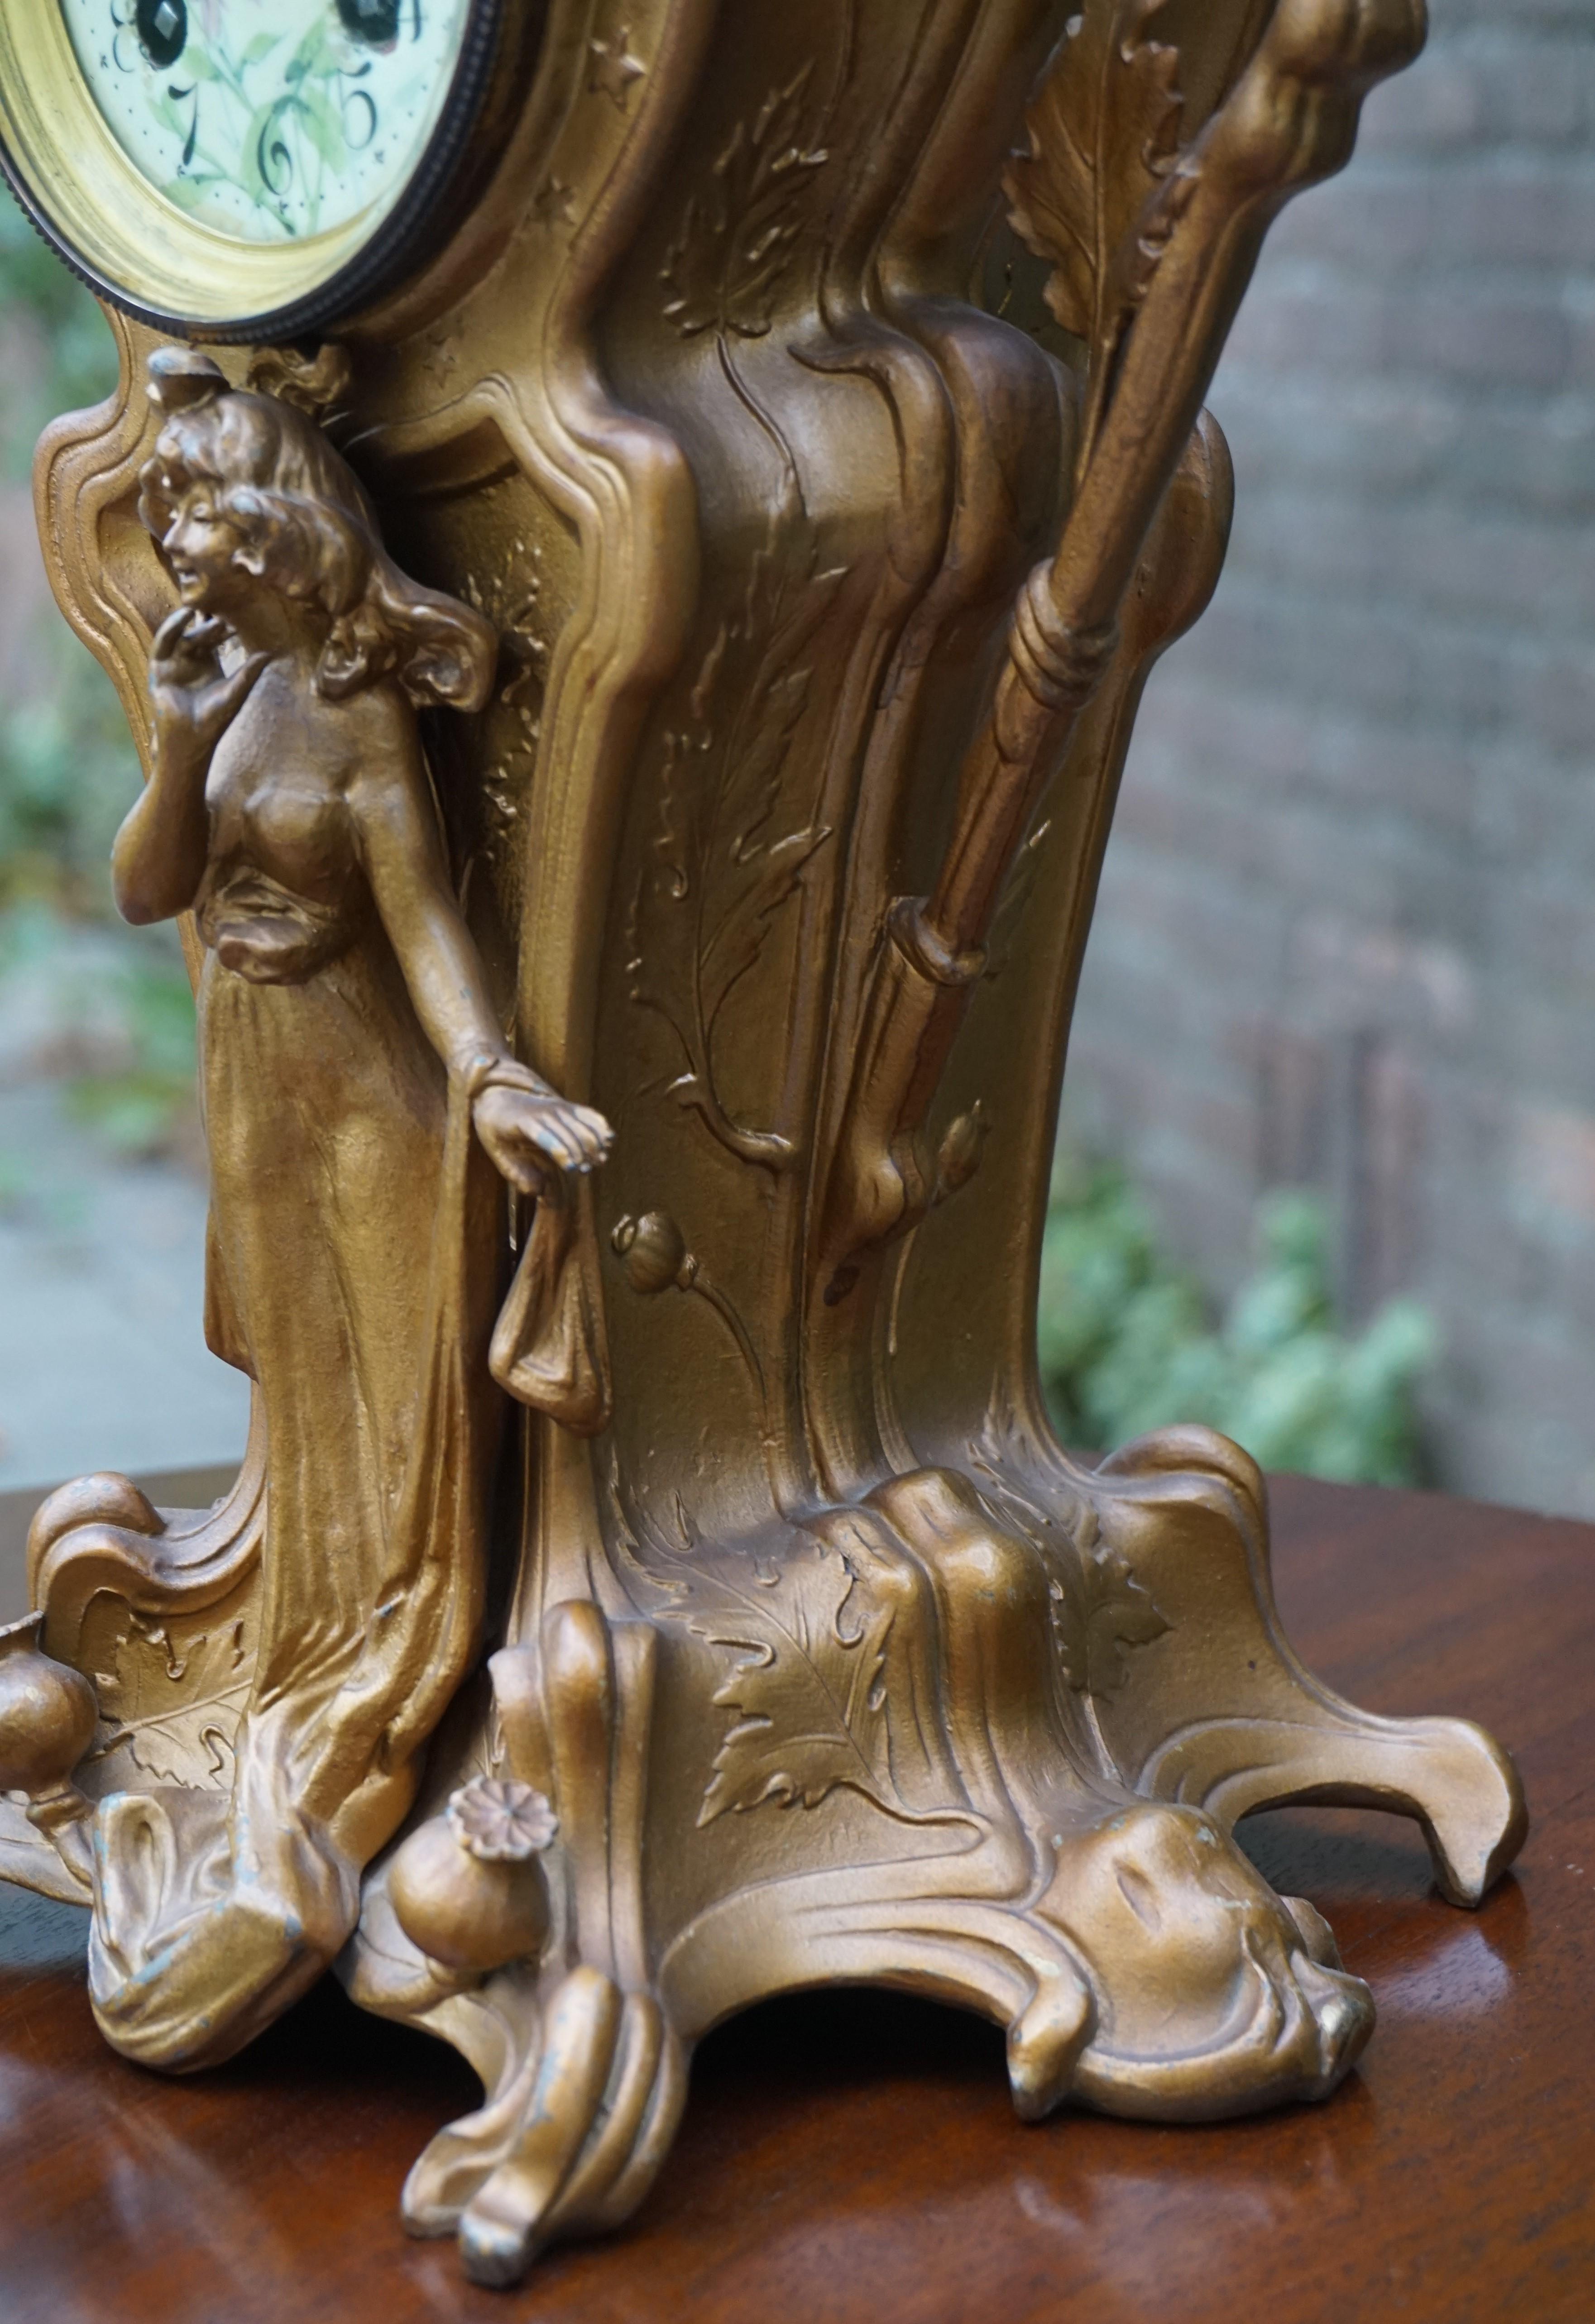 French Stunning Early 20th Century Golden Color Art Nouveau Table or Mantel Clock